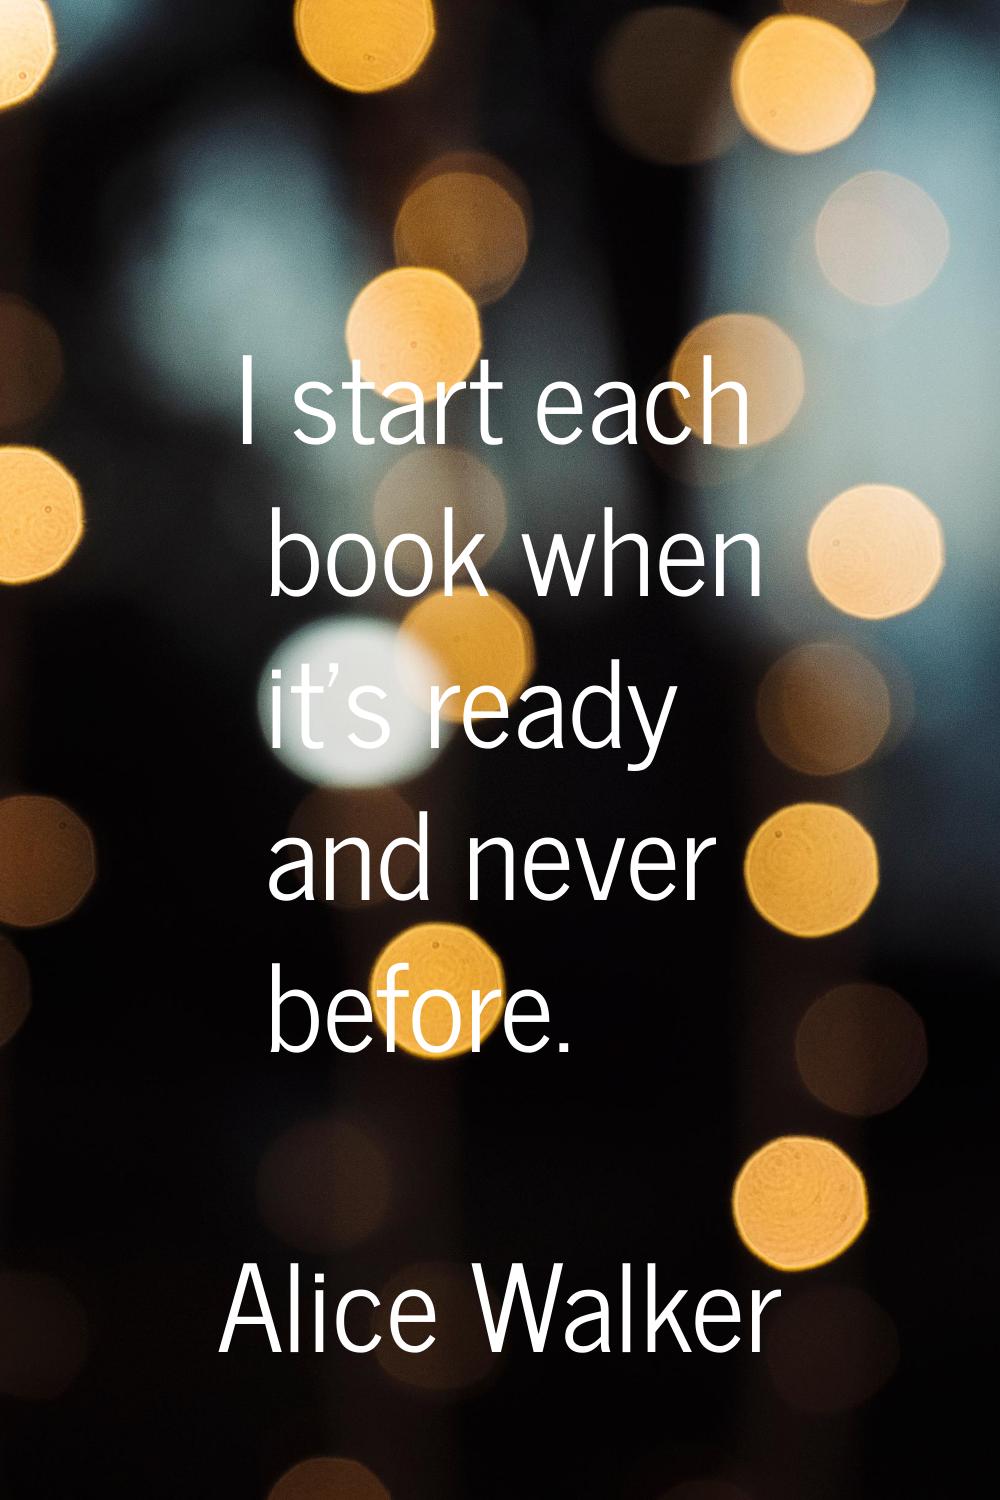 I start each book when it's ready and never before.